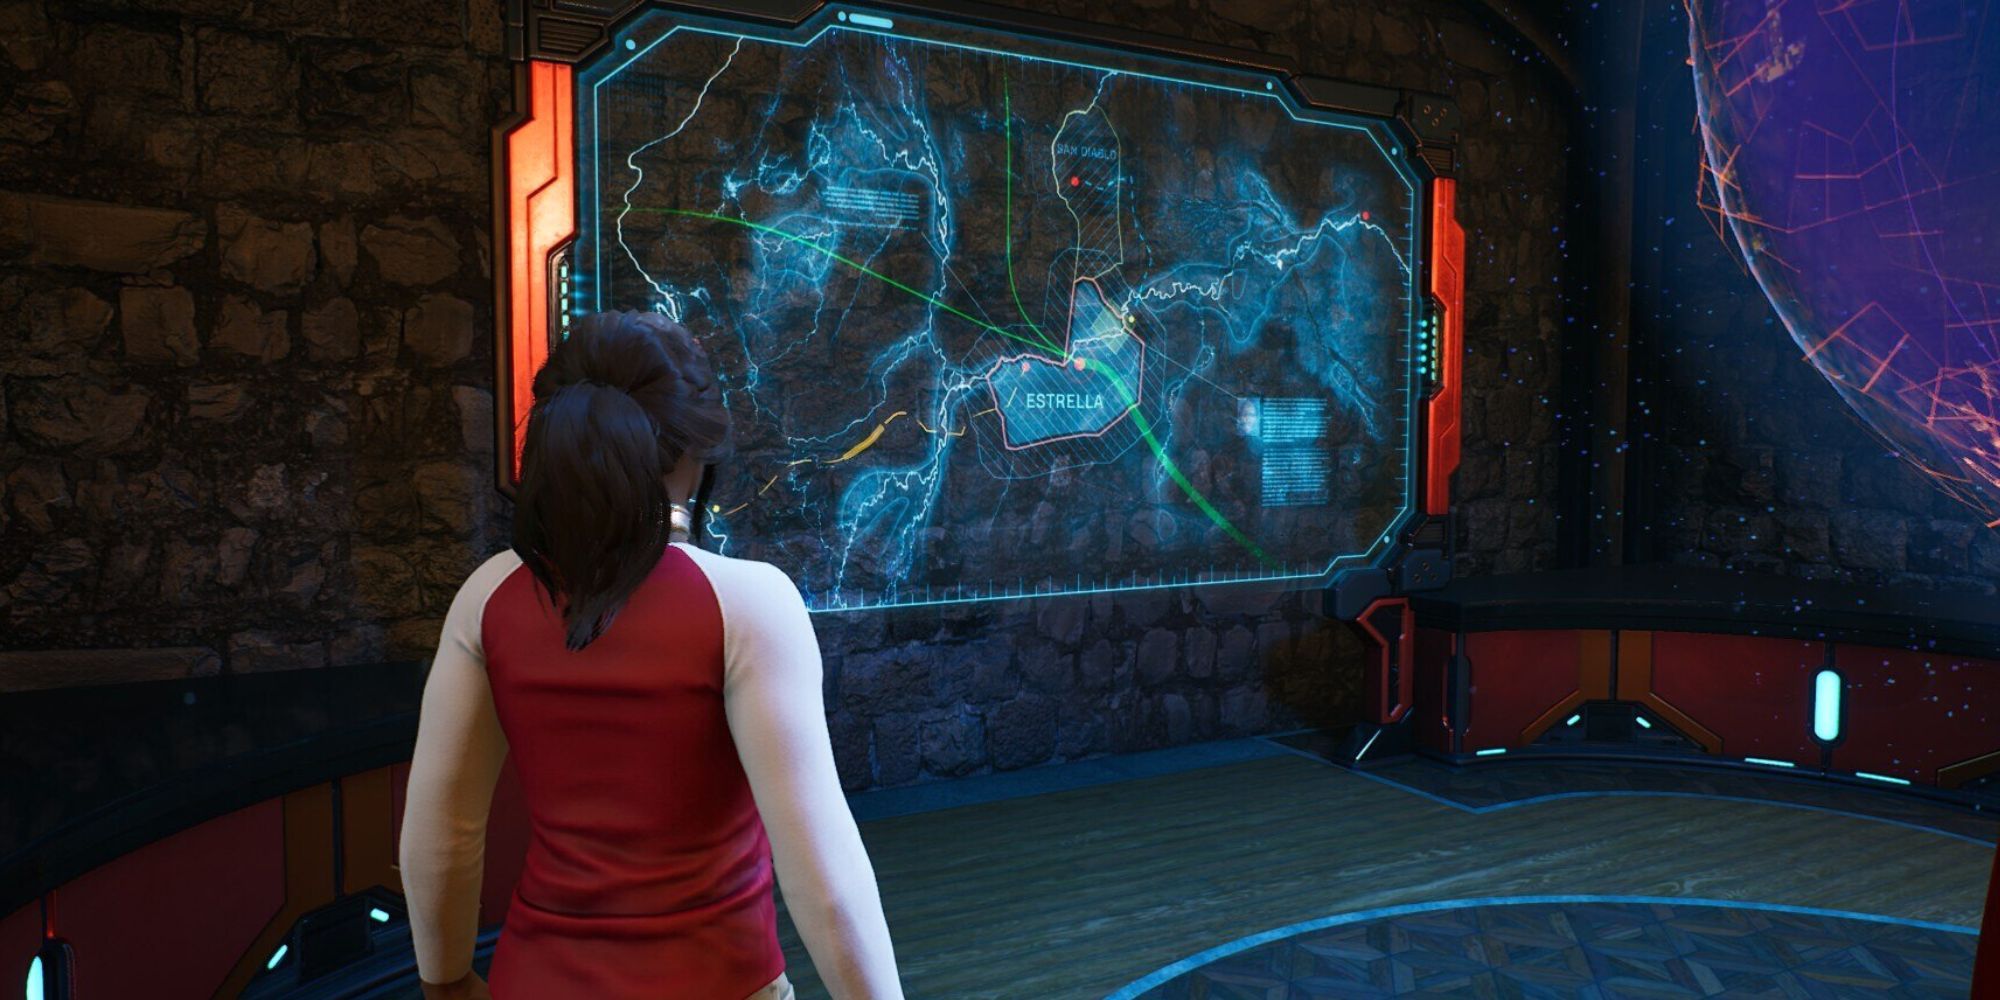 Hunter standing next to a holographic board showing important mission locations.